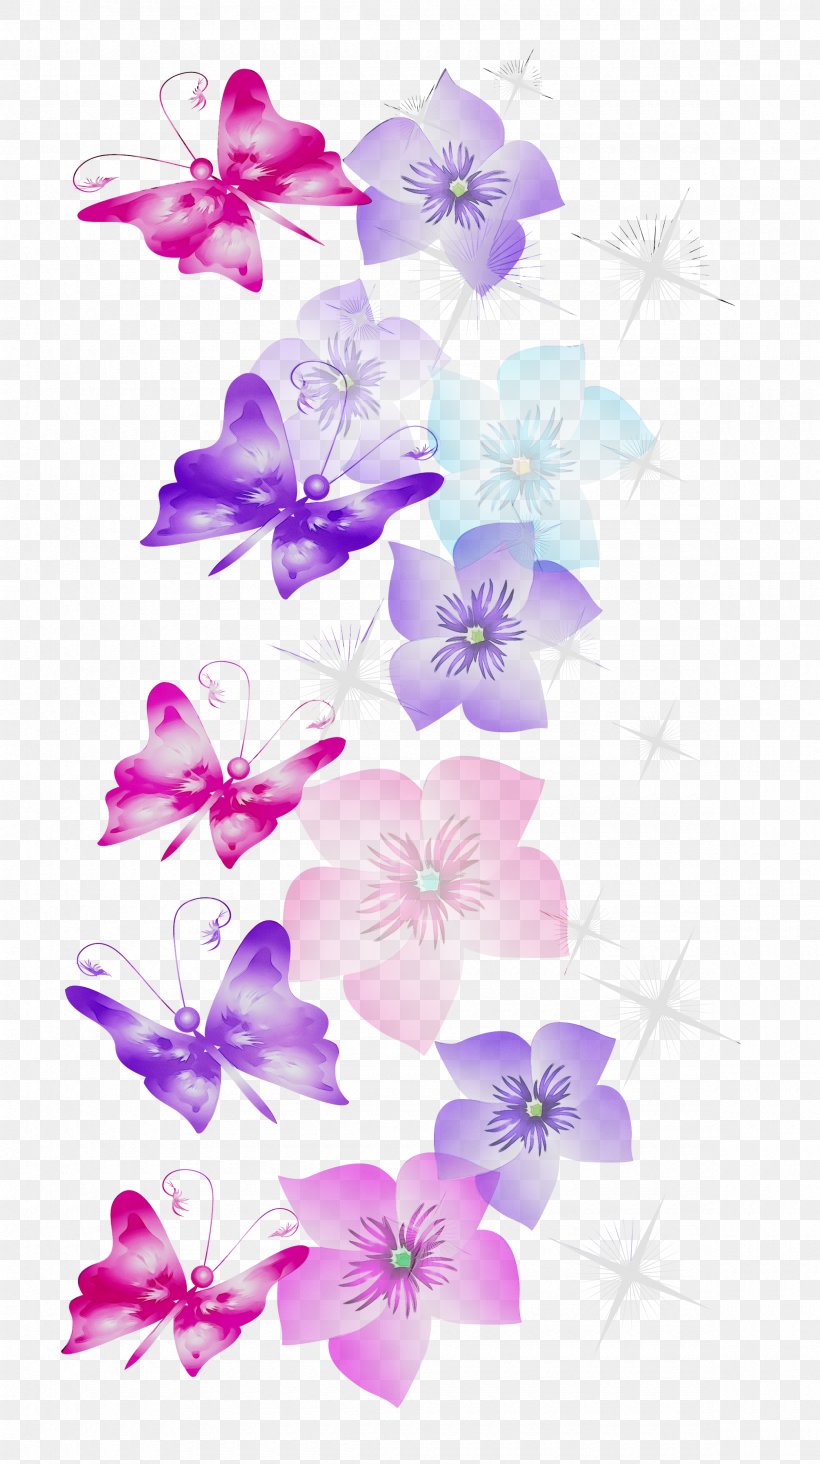 Samsung Galaxy Tab A 9.7 Samsung Galaxy A5 (2017) Samsung Group Samsung Galaxy Tab A 10.1 Samsung Galaxy Tab A 7.0 (2016), PNG, 2360x4214px, Samsung Galaxy Tab A 97, Cut Flowers, Flower, Impatiens, Lilac Download Free